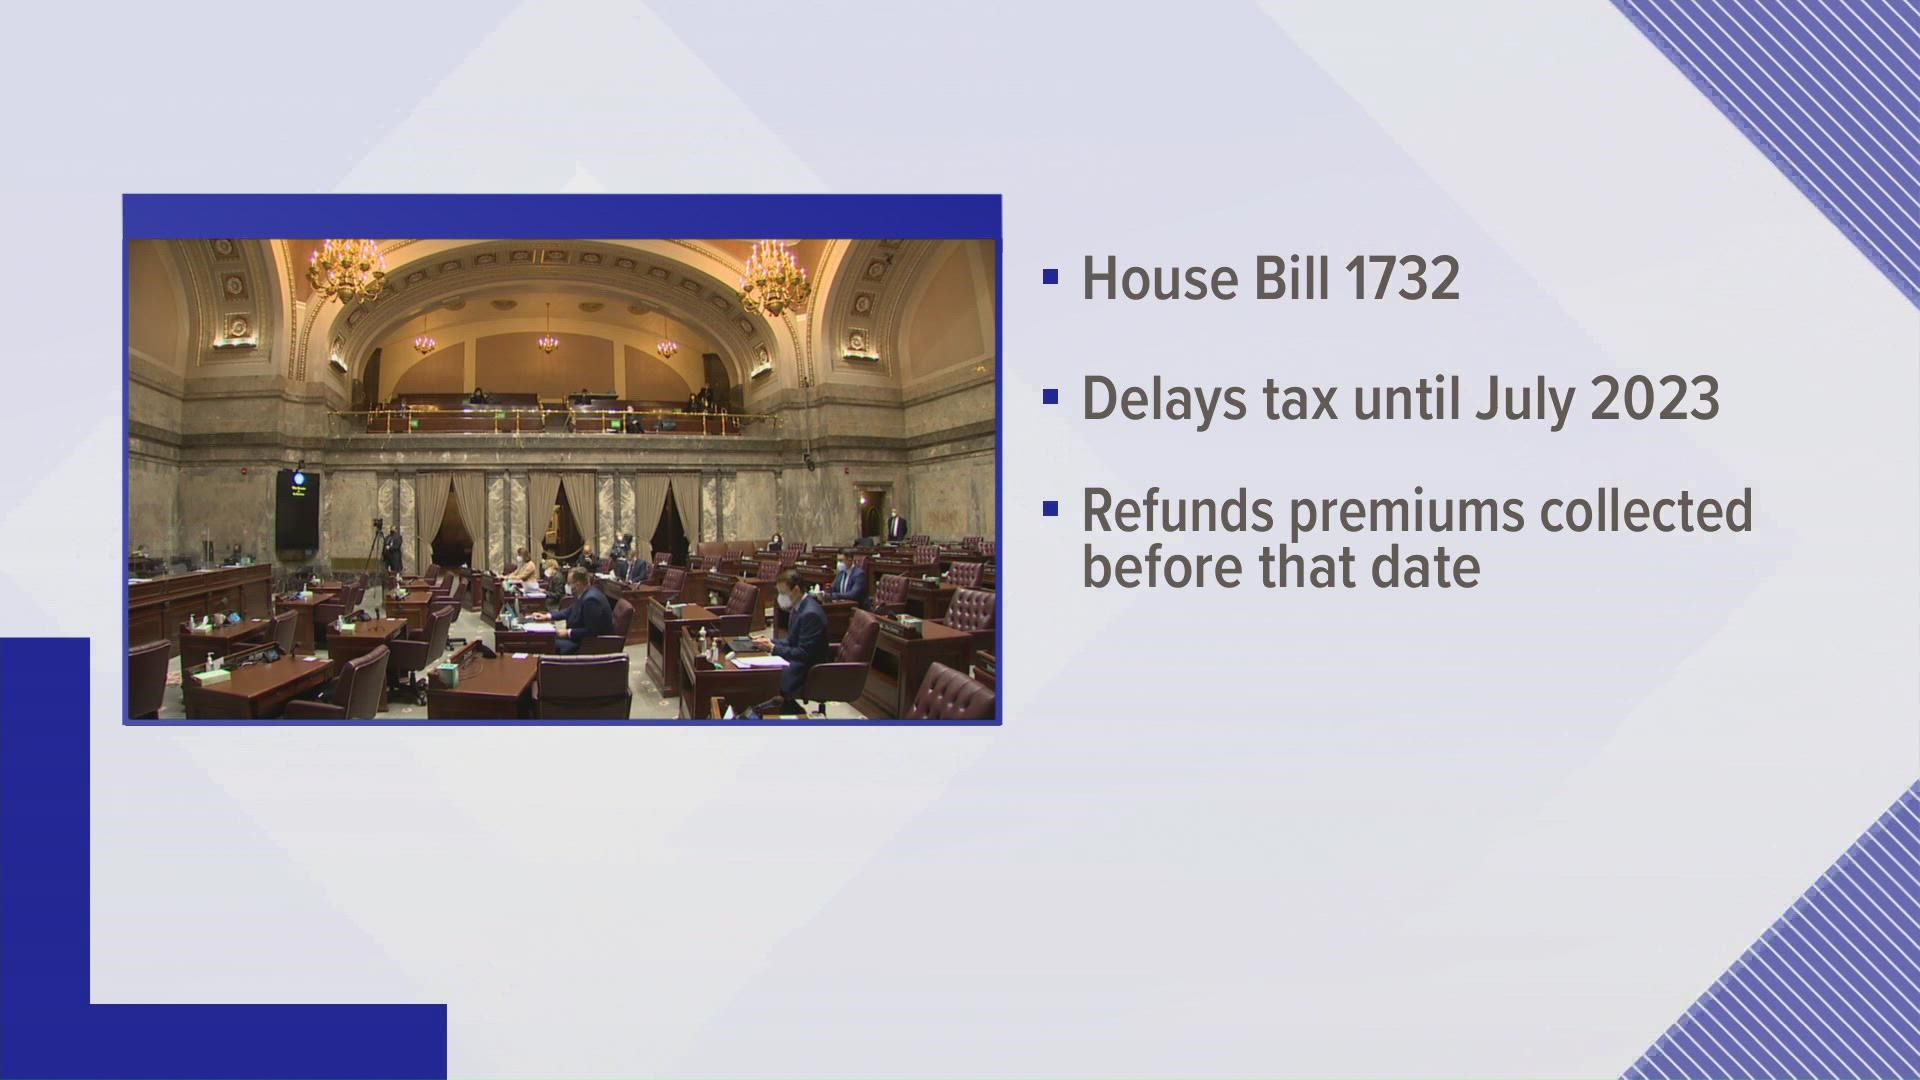 If passed, the tax to fund the new Washington Cares Fund would not be implemented until July 2023.